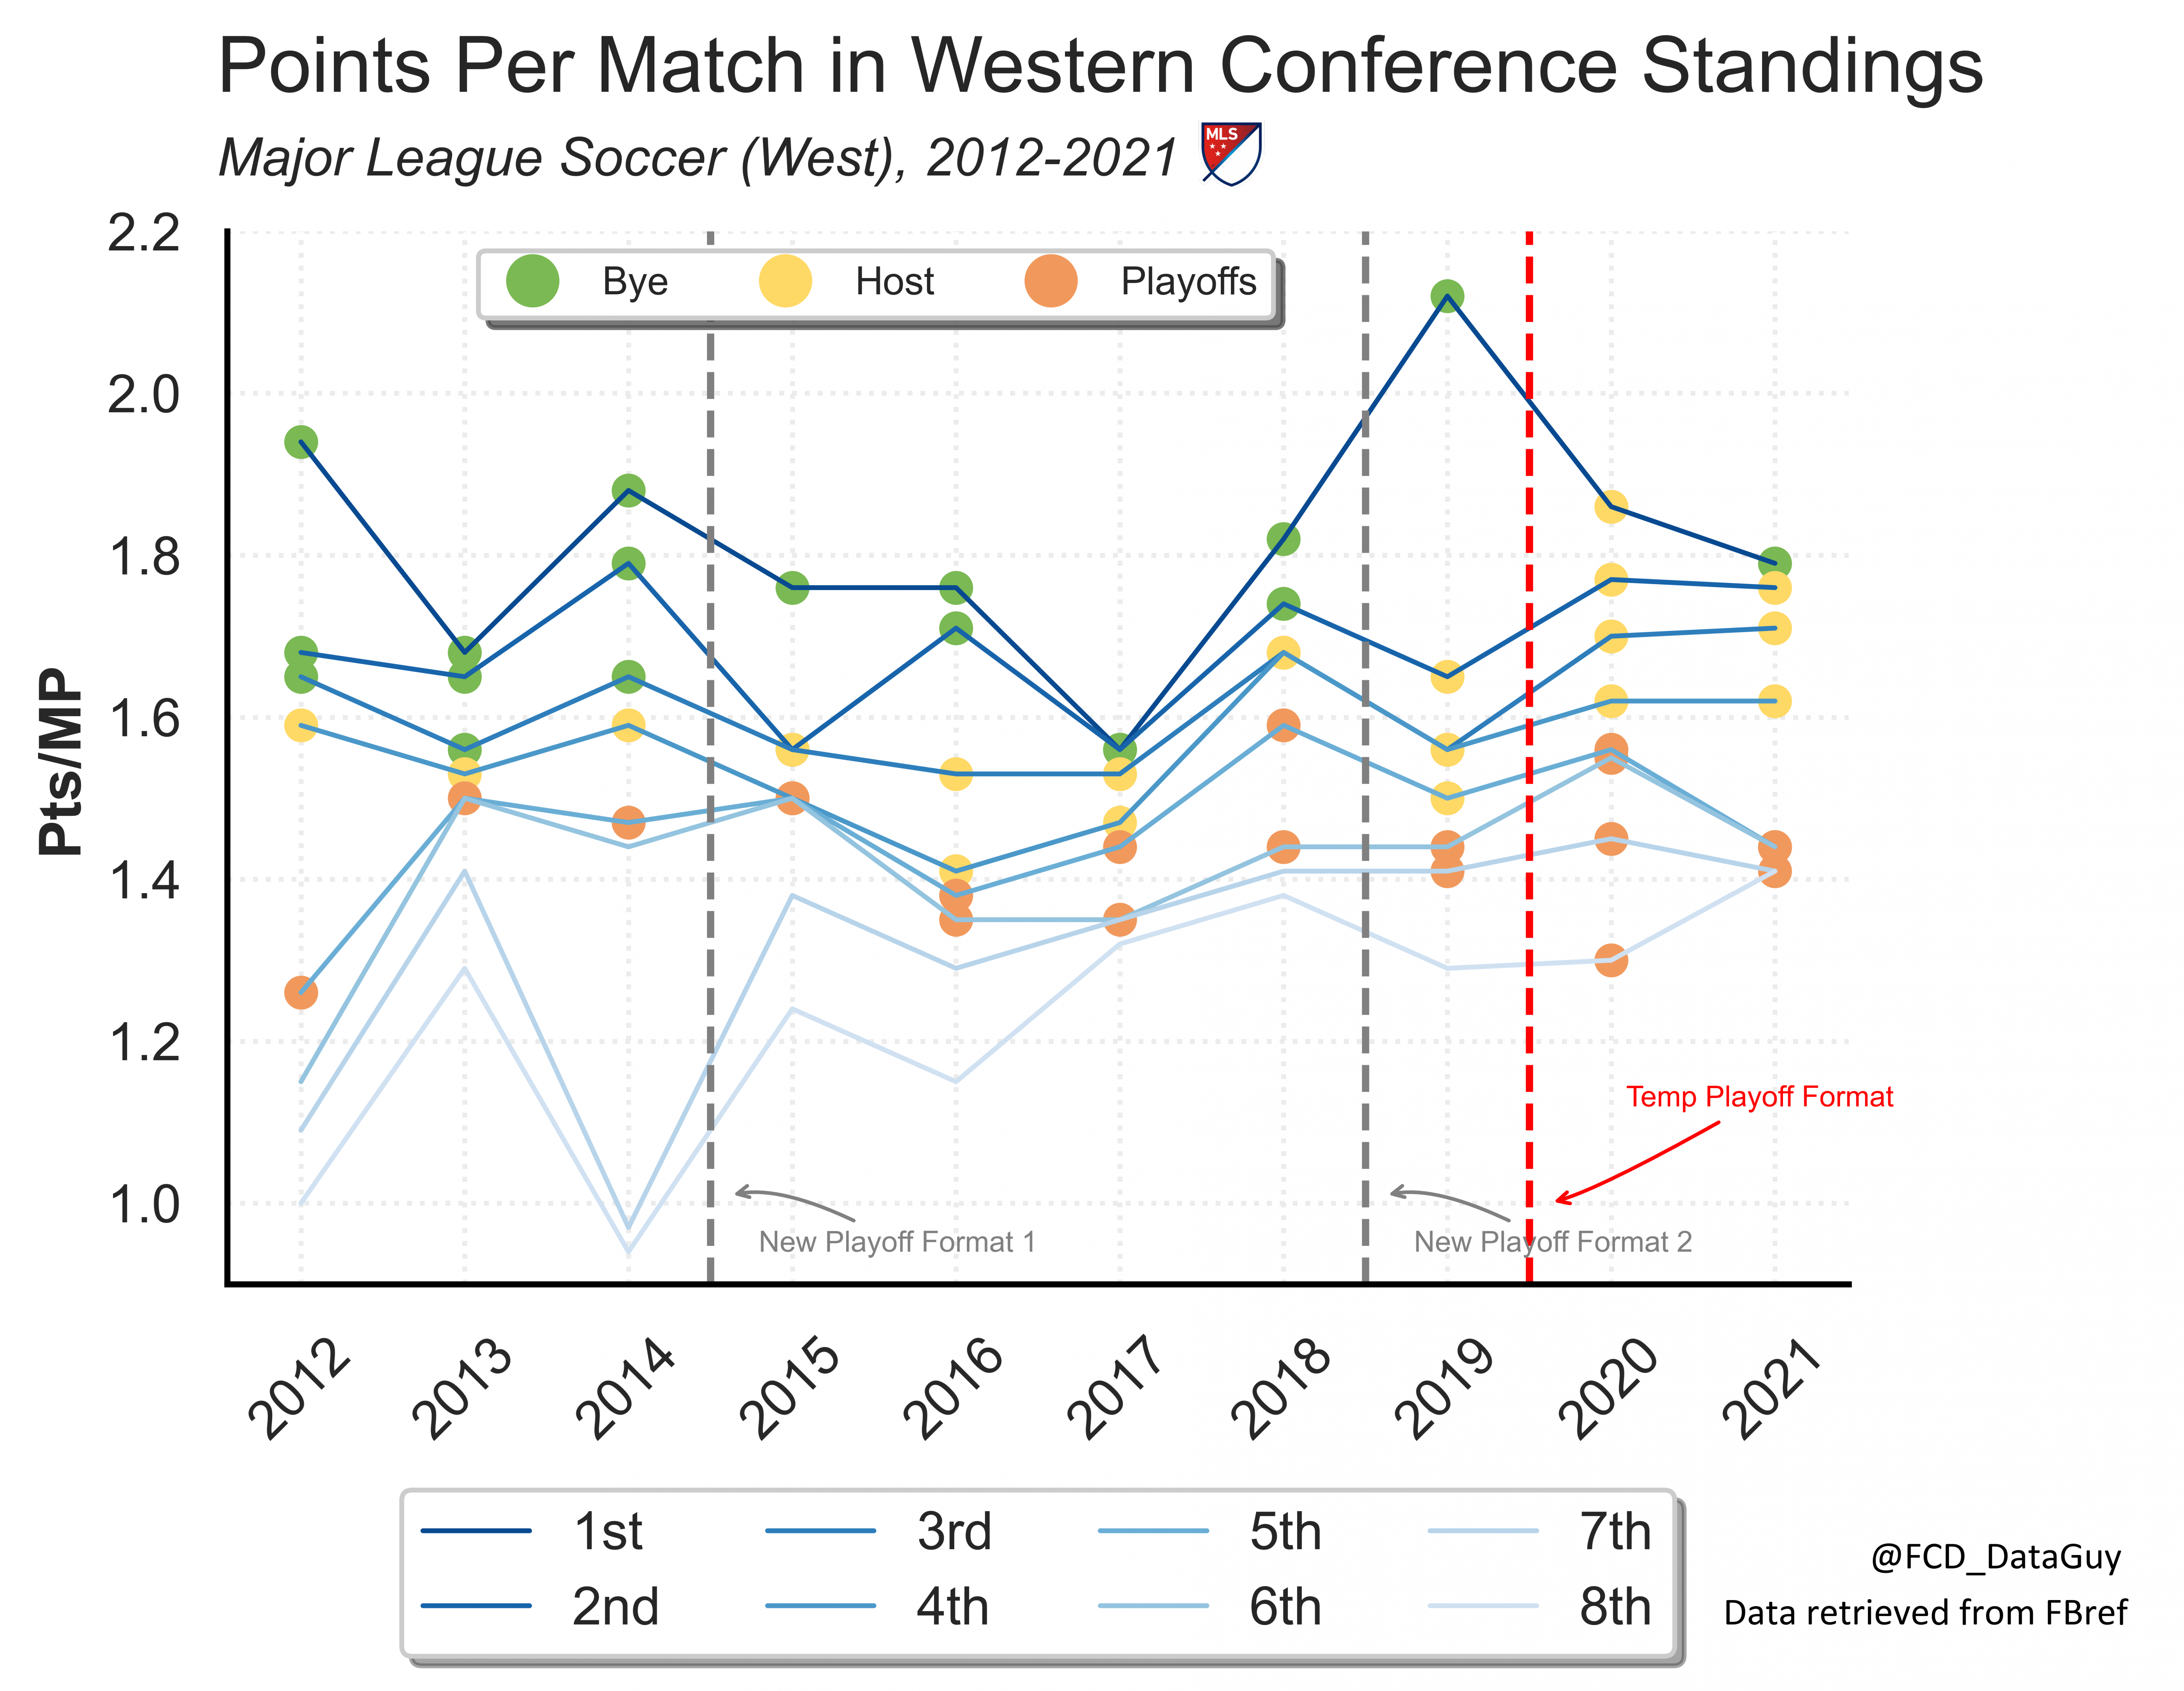 Points per game in the Western Conference standings.